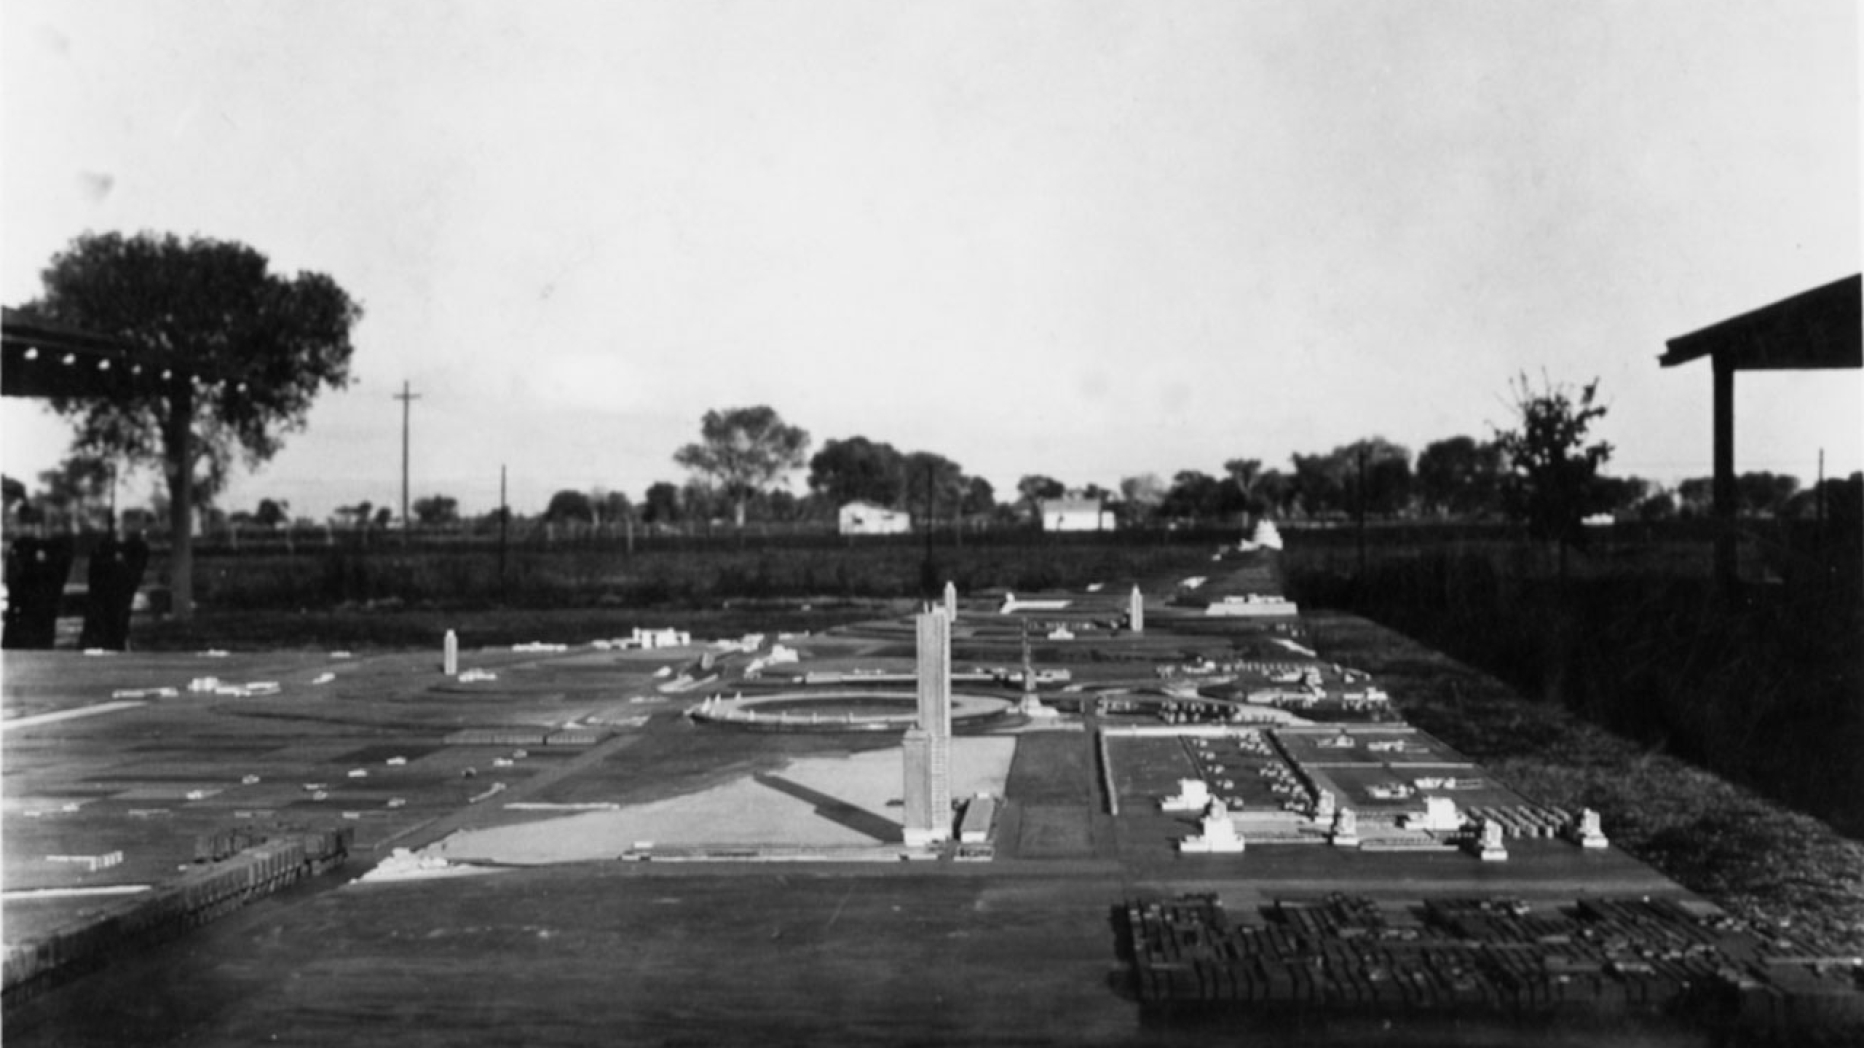 Old black and white photograph of large scale architectural model.